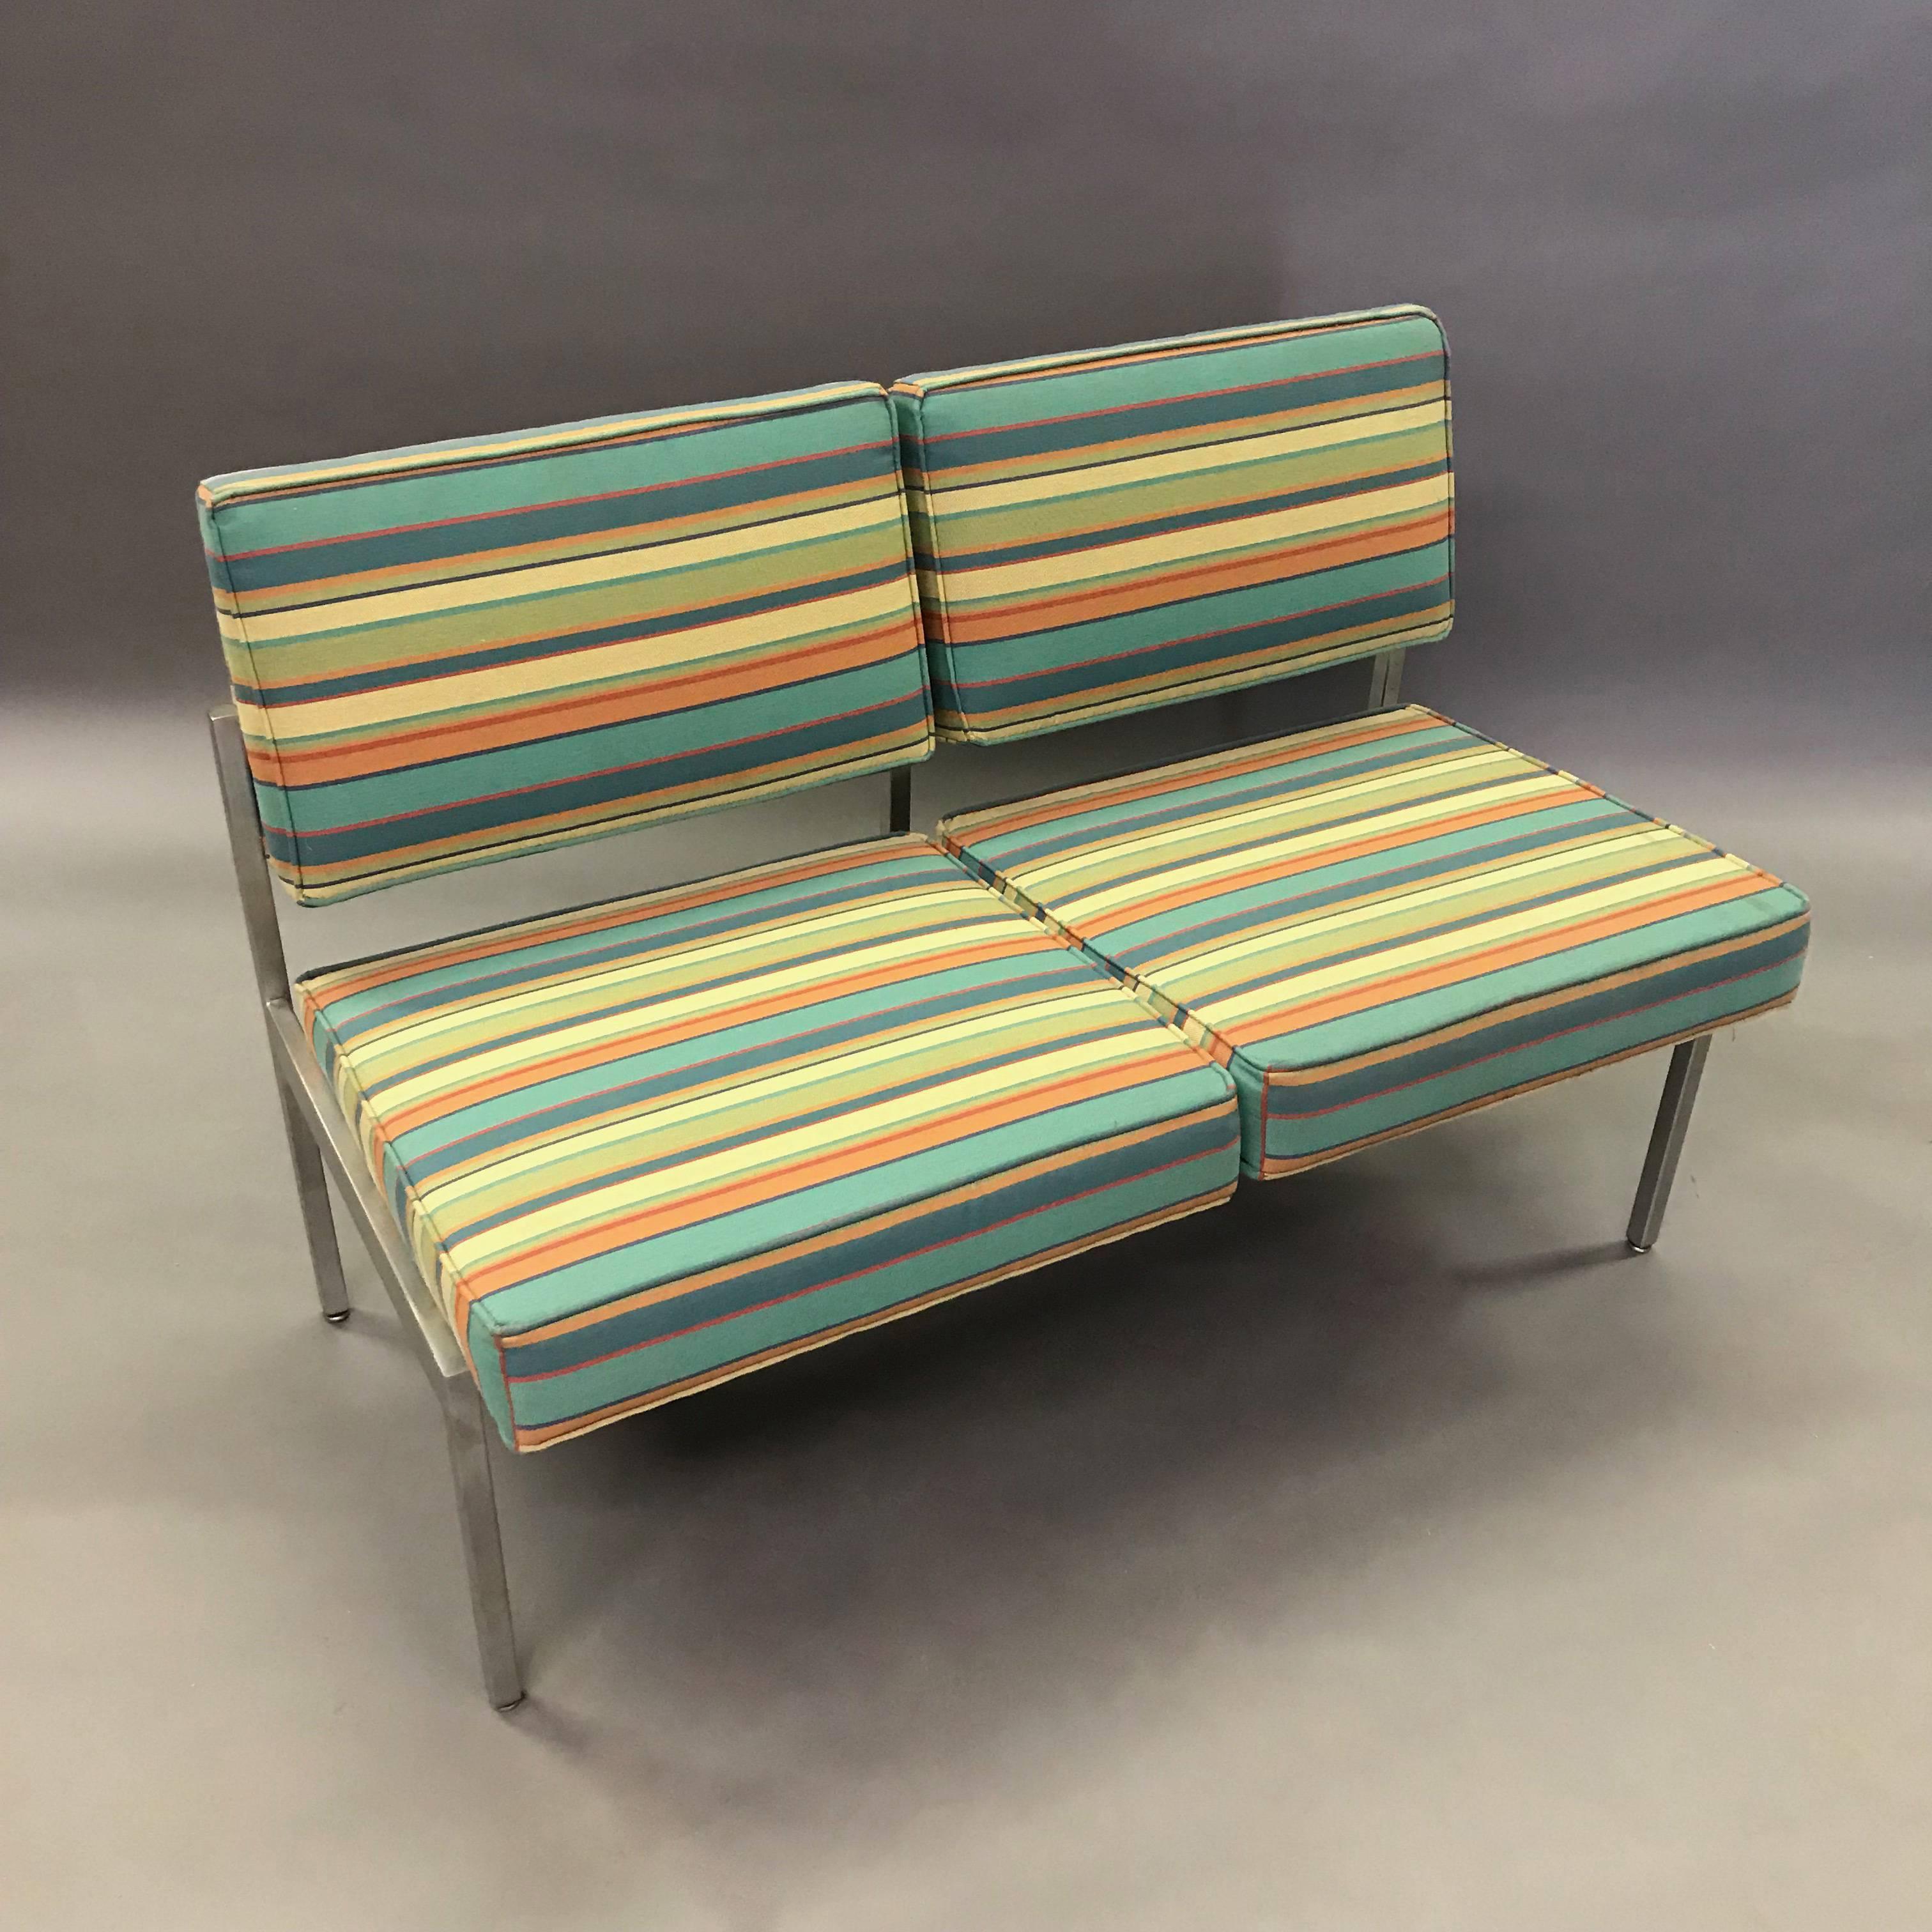 Mid-Century Modern, loveseat sofa with steel frame by Steelcase is newly upholstered in a crisp striped linen blend.